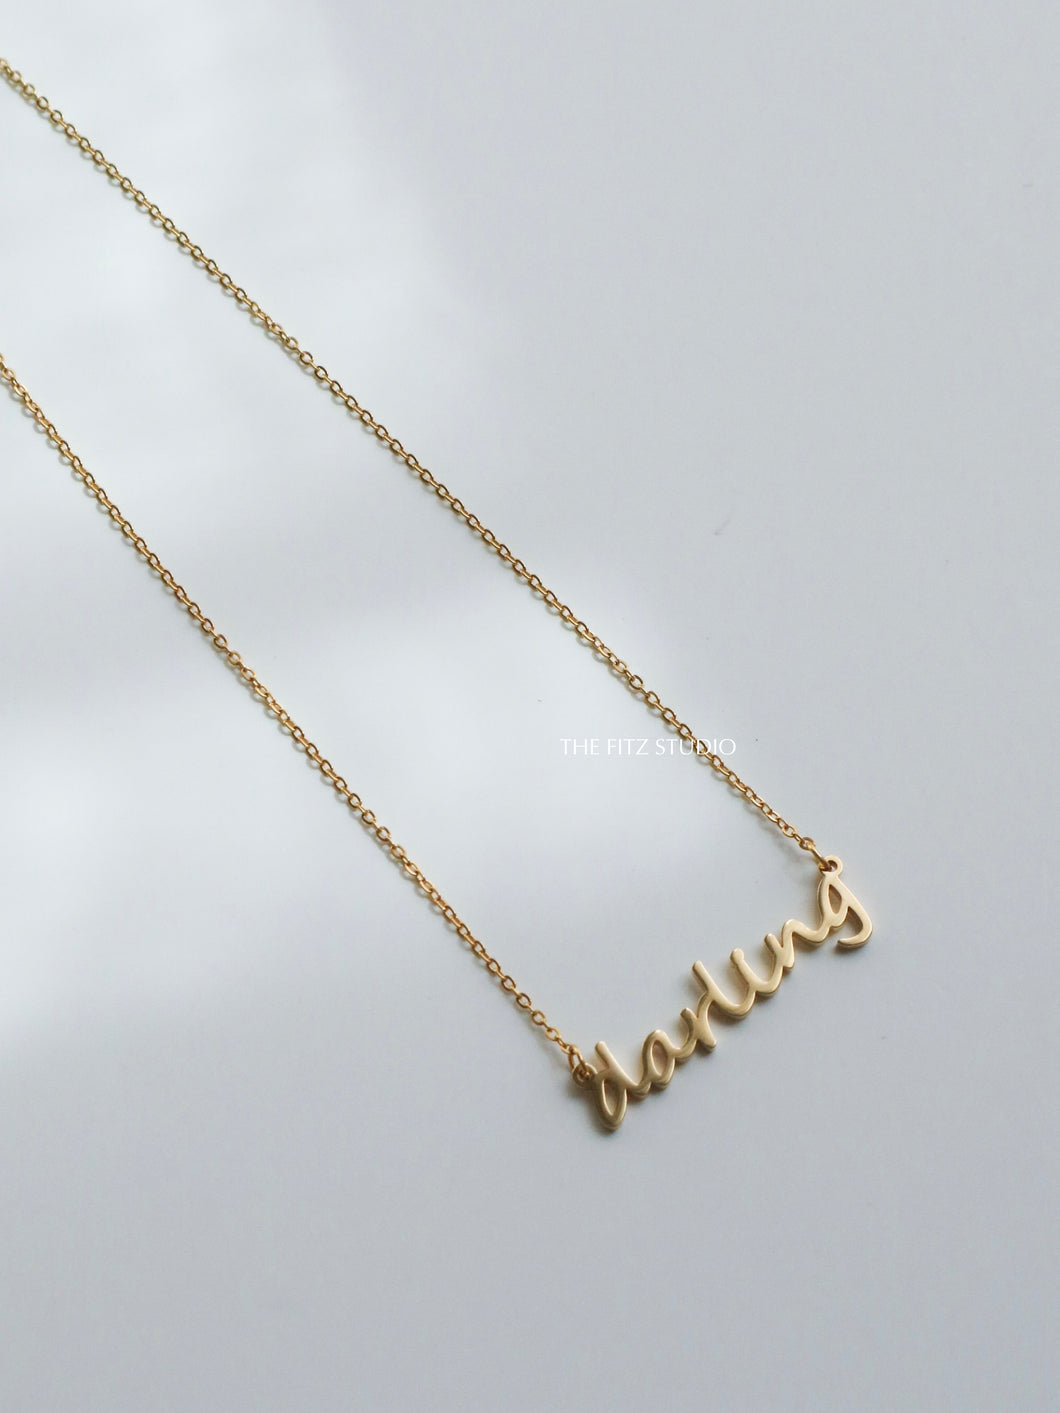 Your Darling Necklace